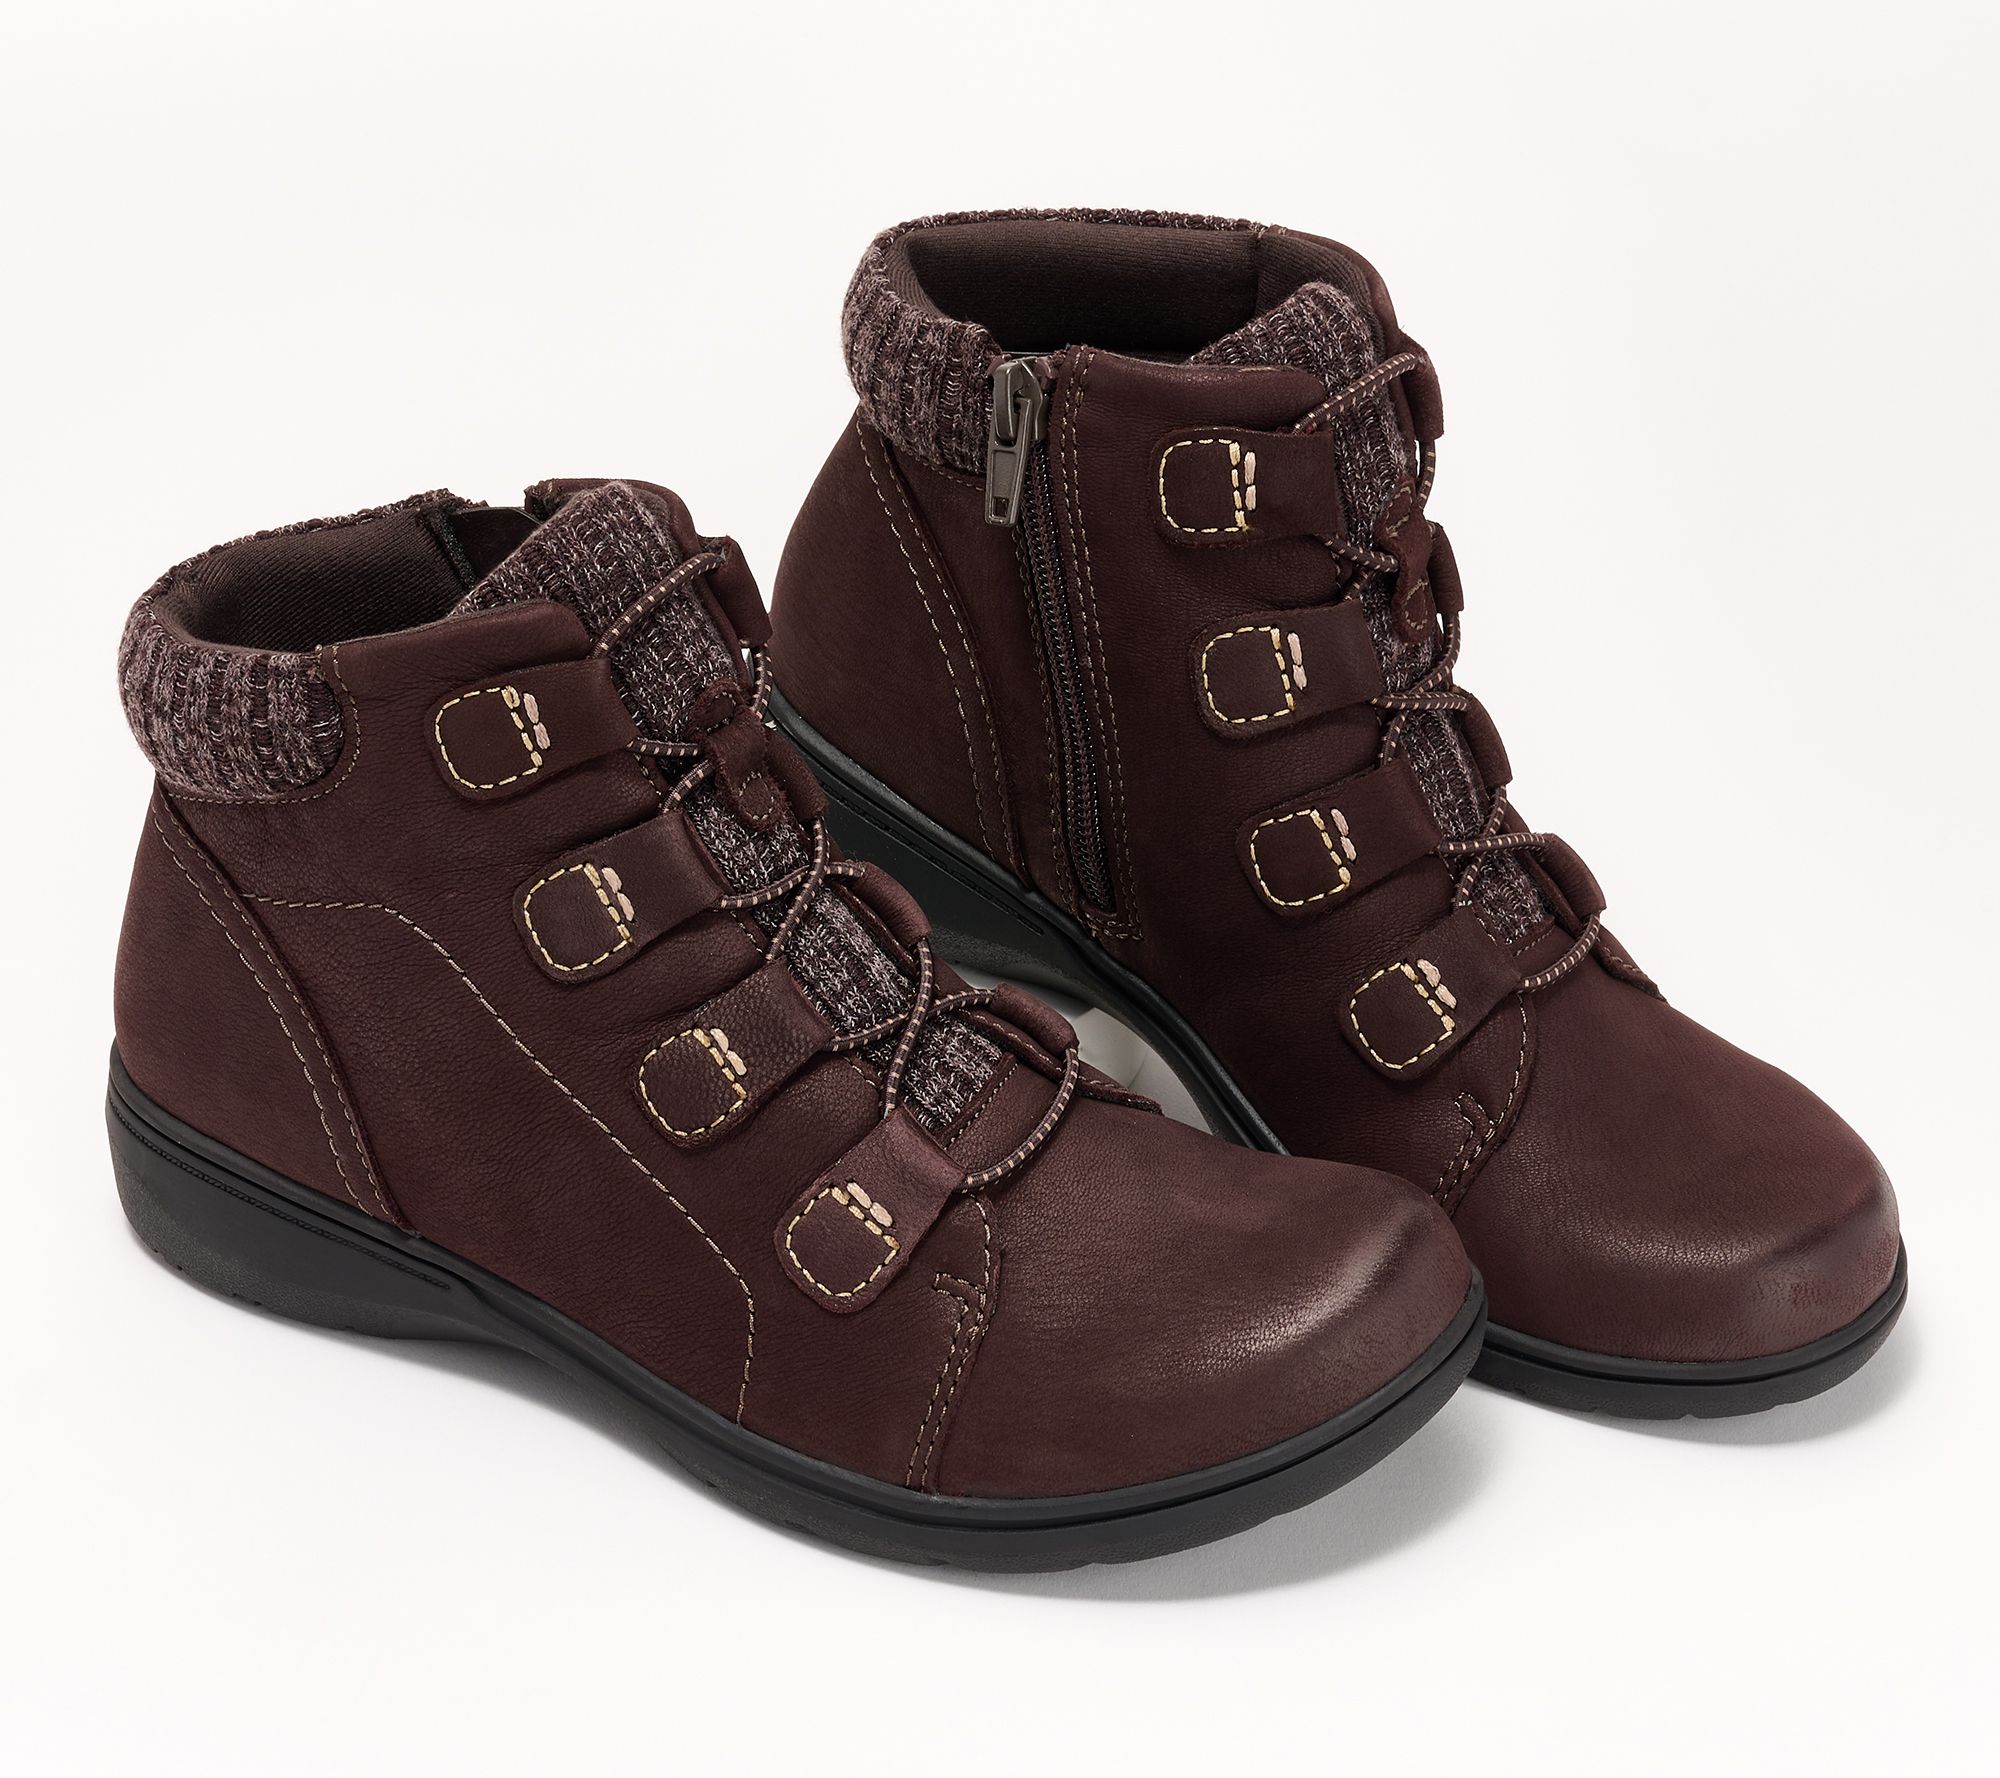 Multi-Logo Stretch Boot: Women's Shoes, Ankle Boots